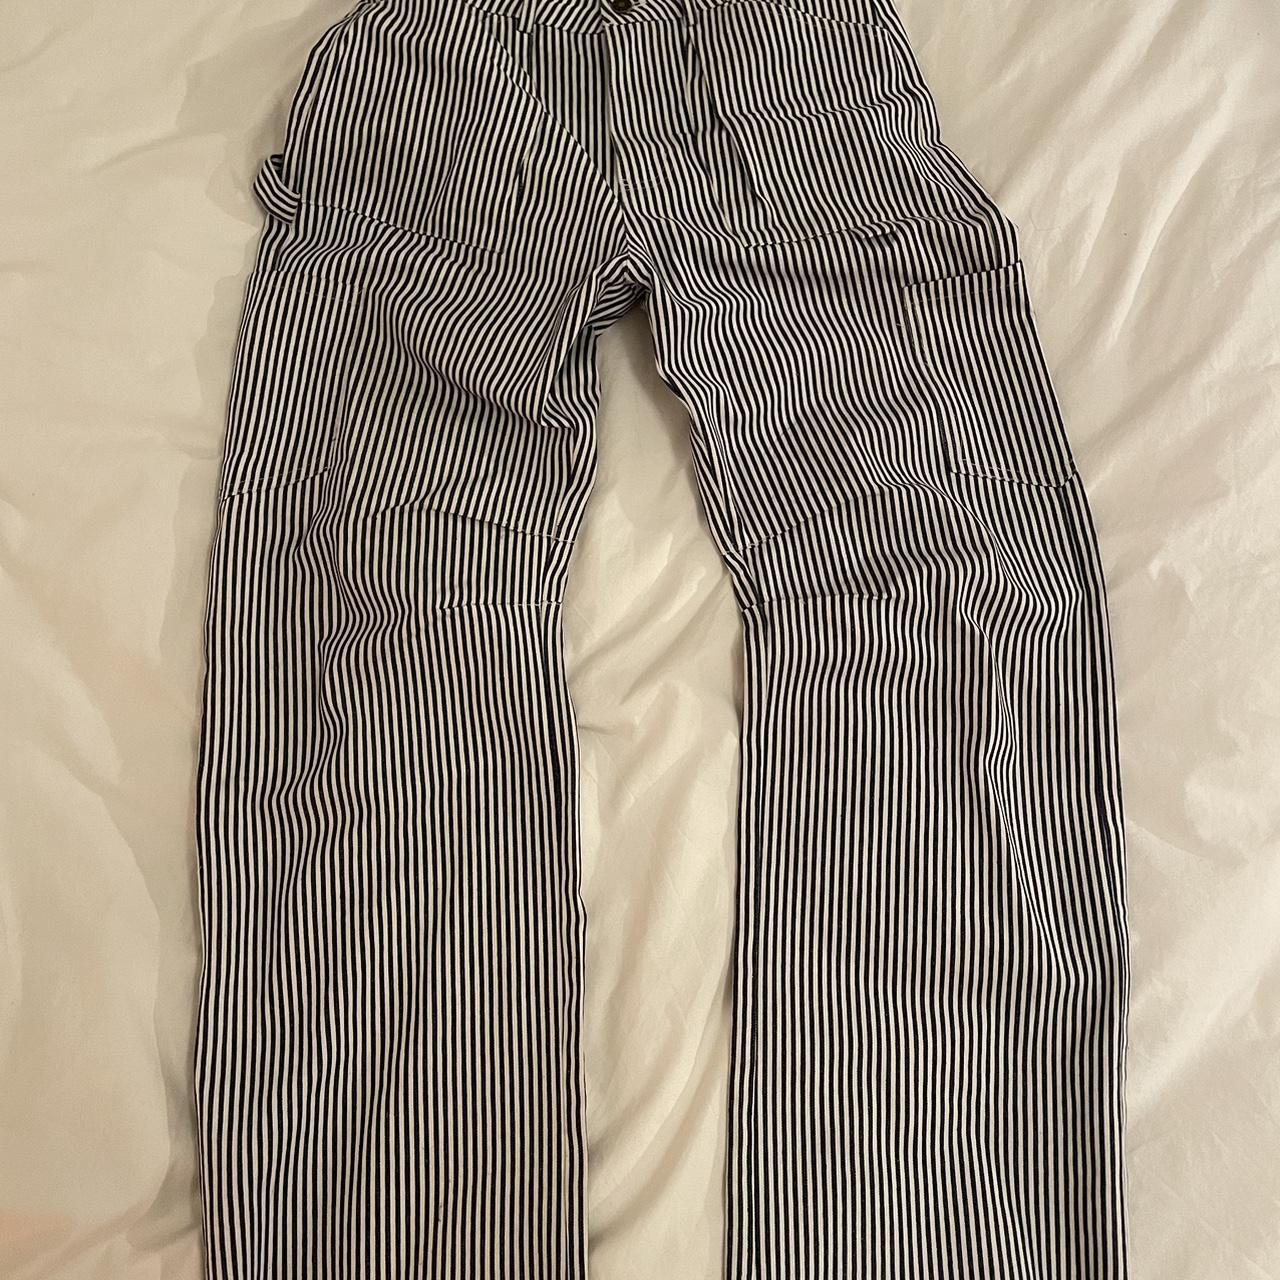 item listed by maiasthriftshop